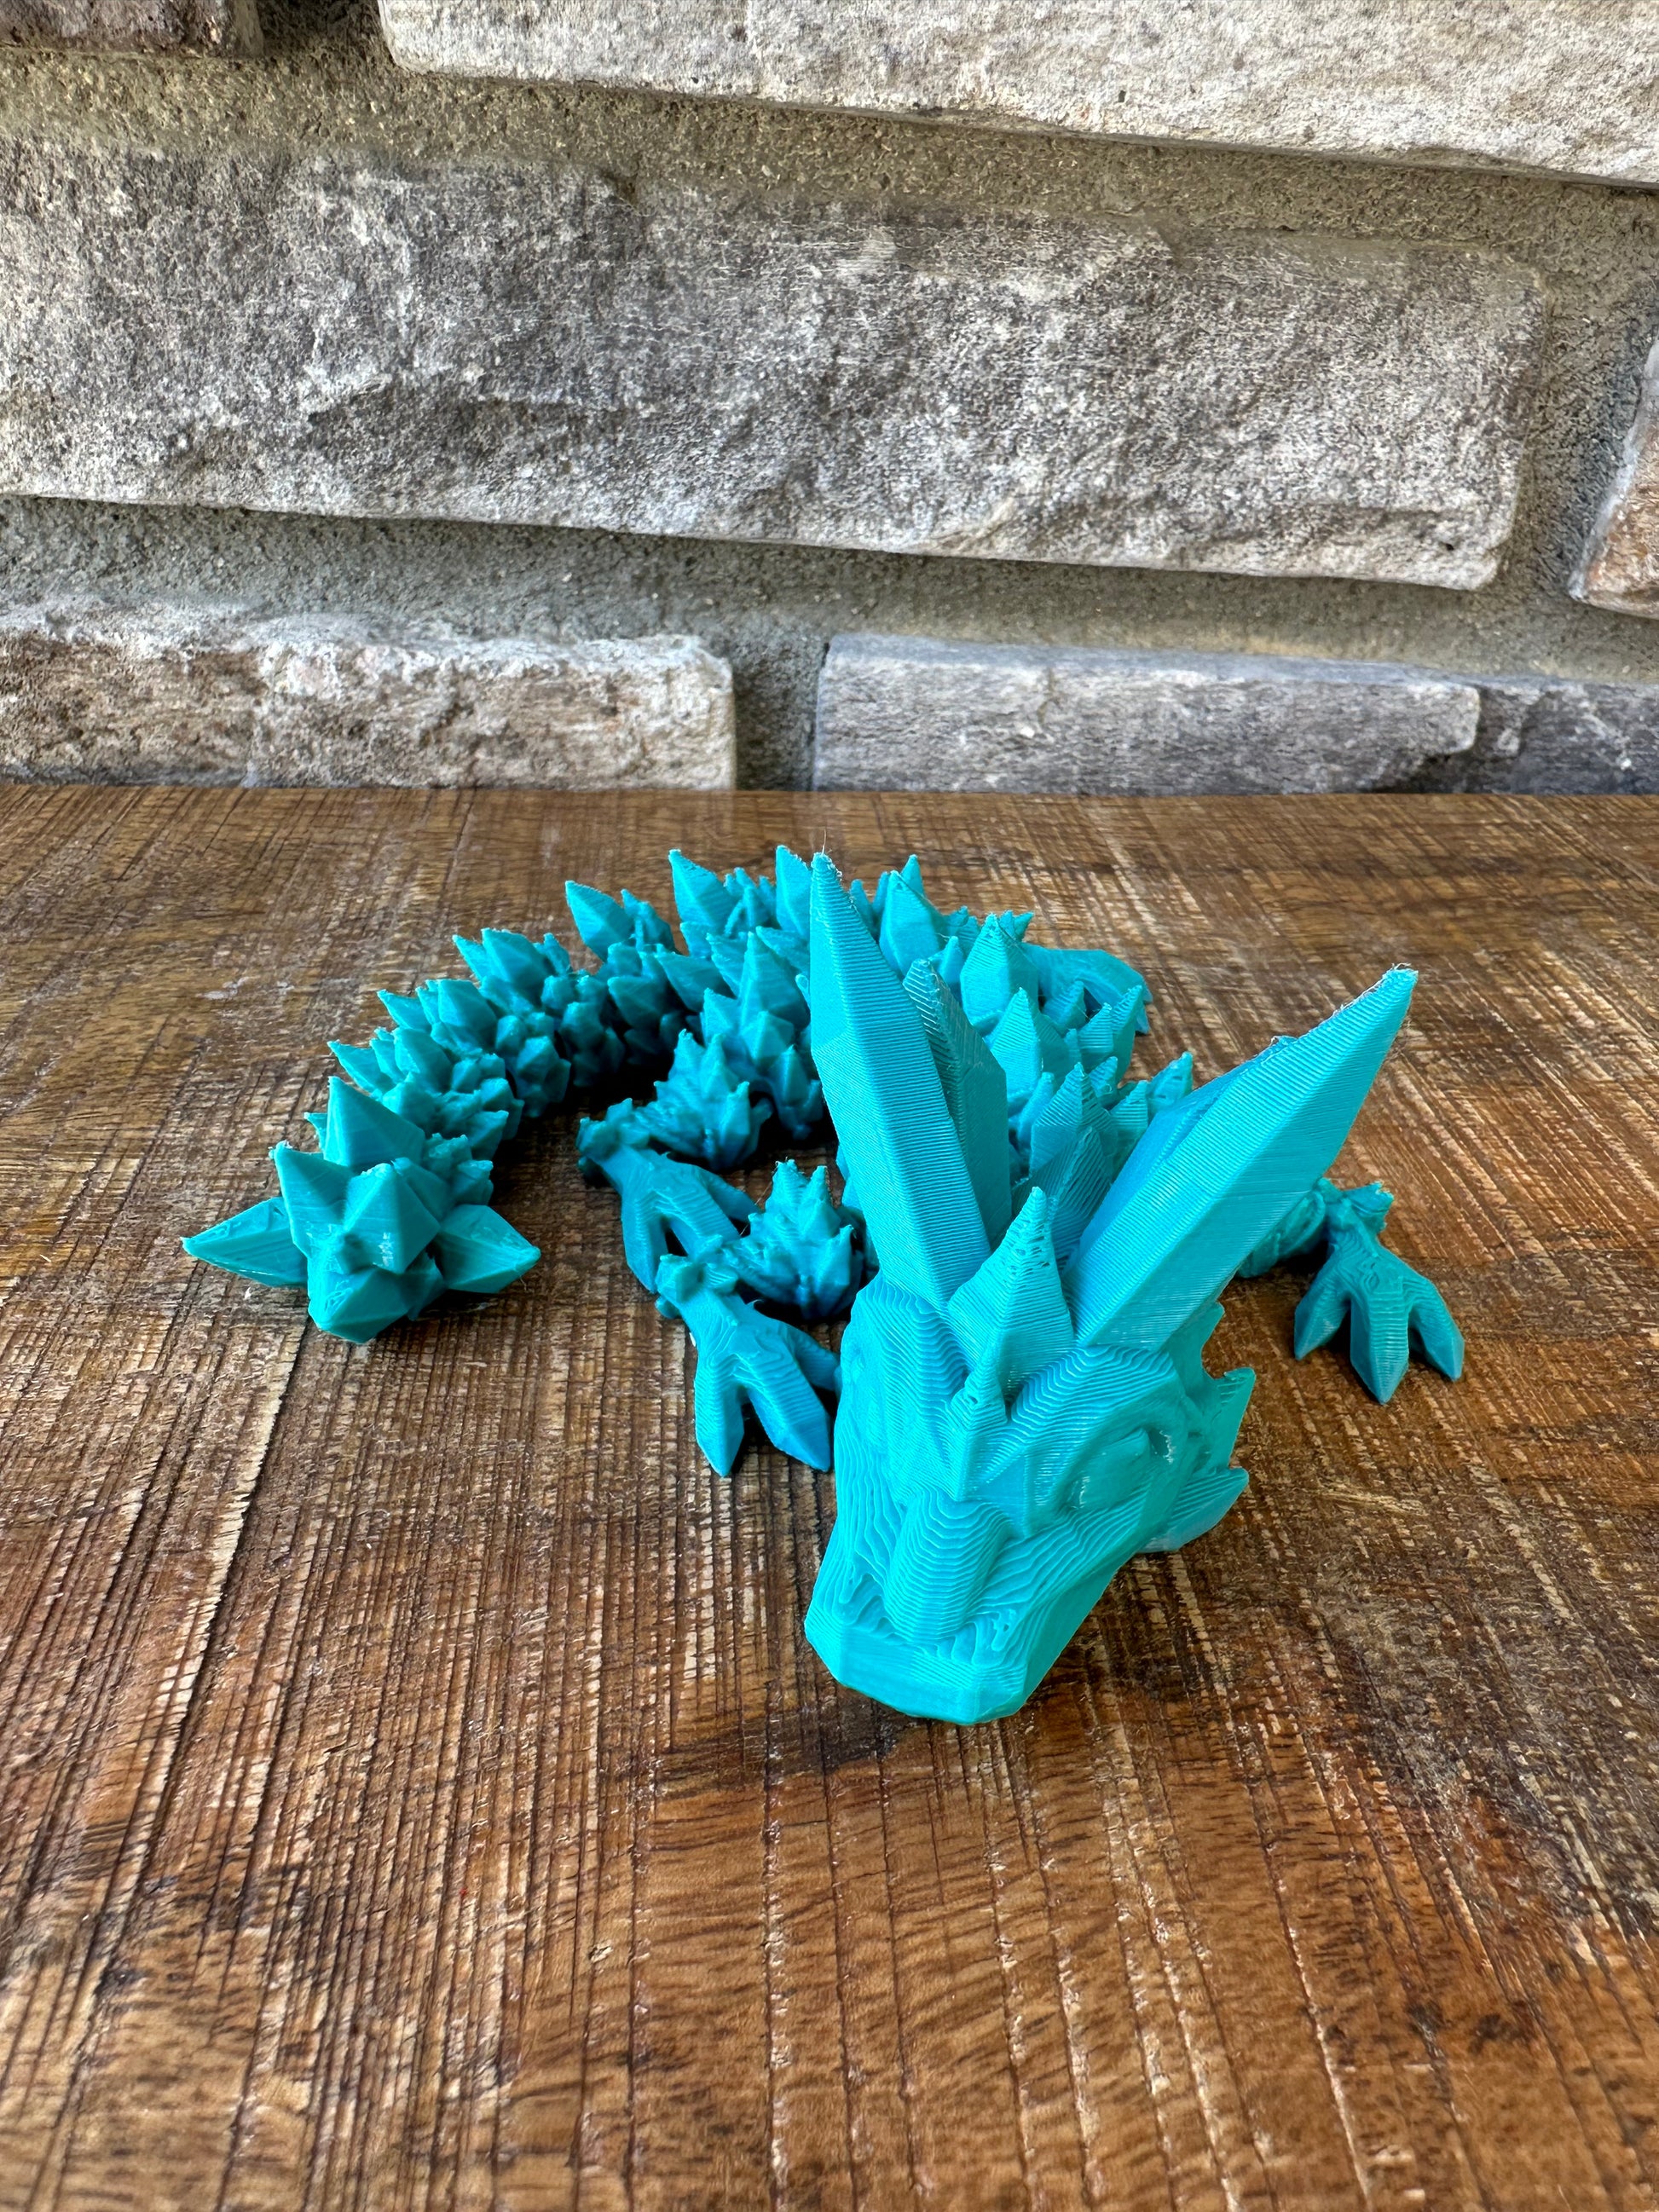 3D Printed Articulated Flexi Crystal Dragon Fidget Toy (Small, Galaxy Gold)